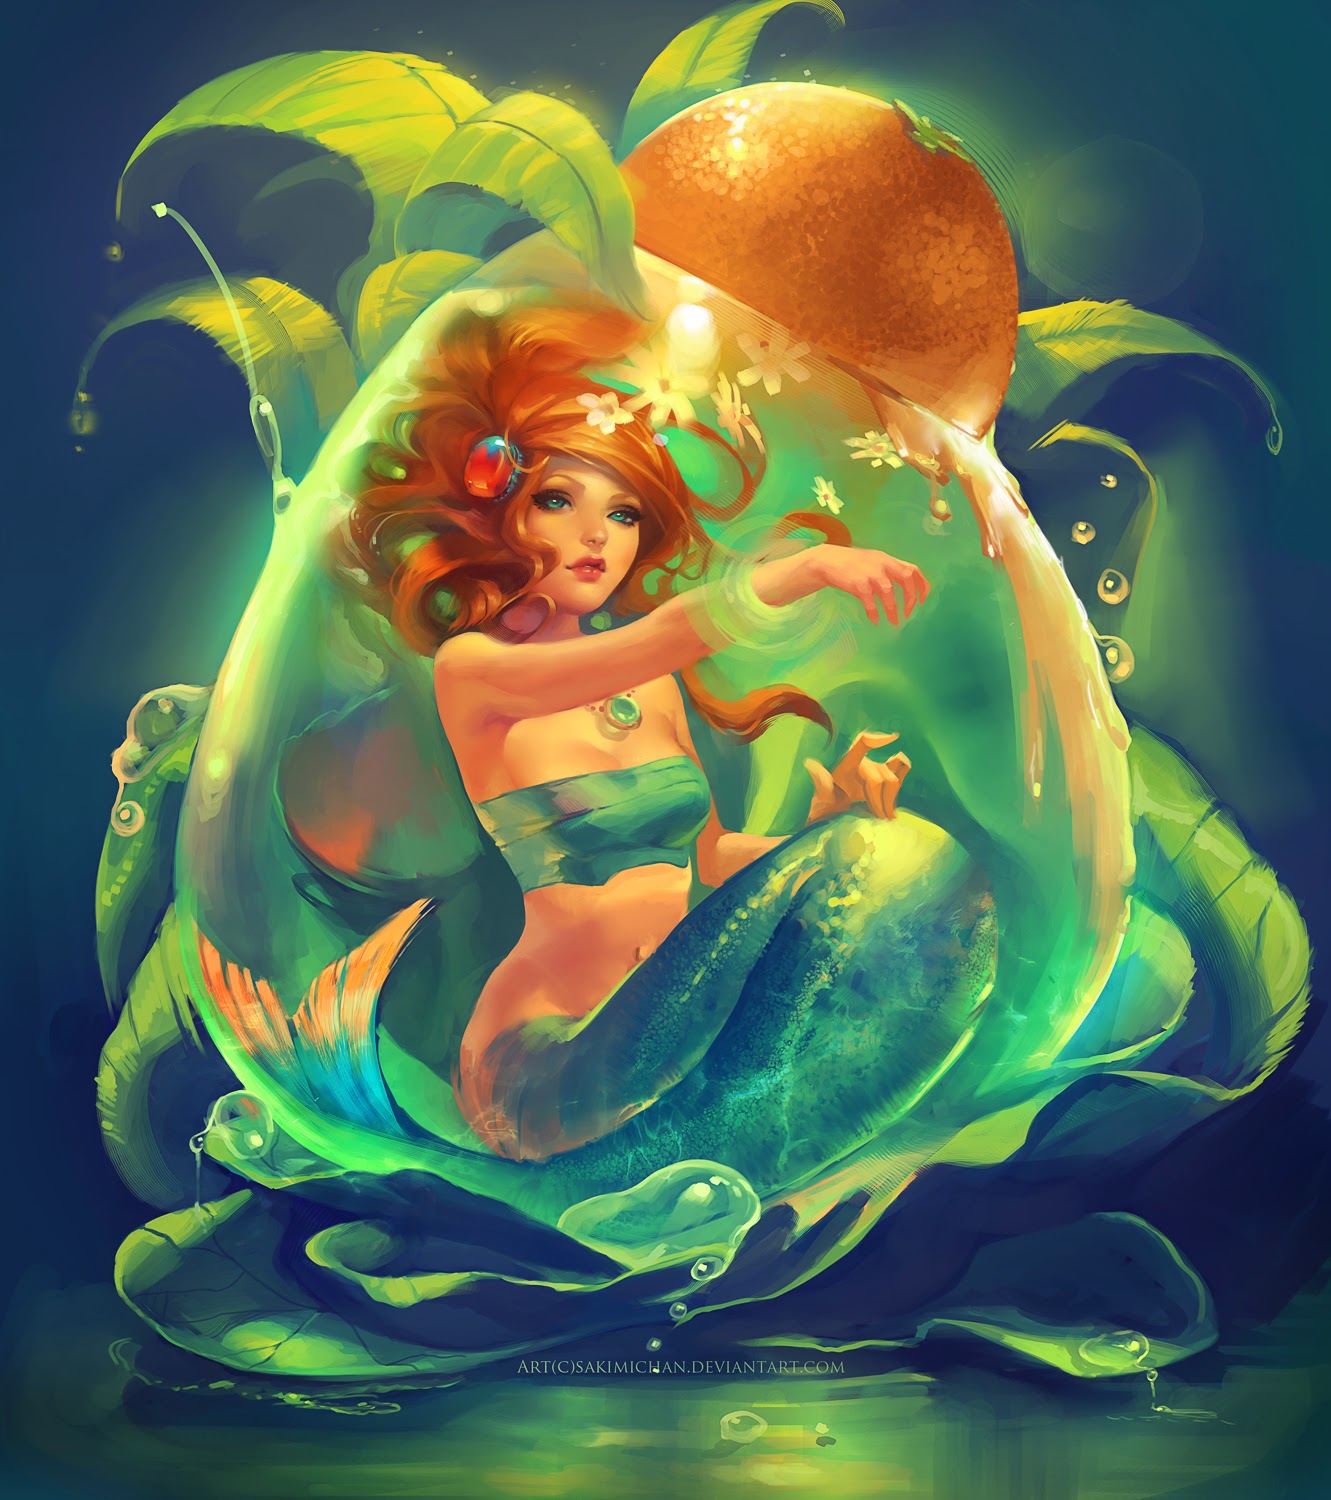 Mermaid Moon Fantasy Widescreen HD Wallpaper From The Above